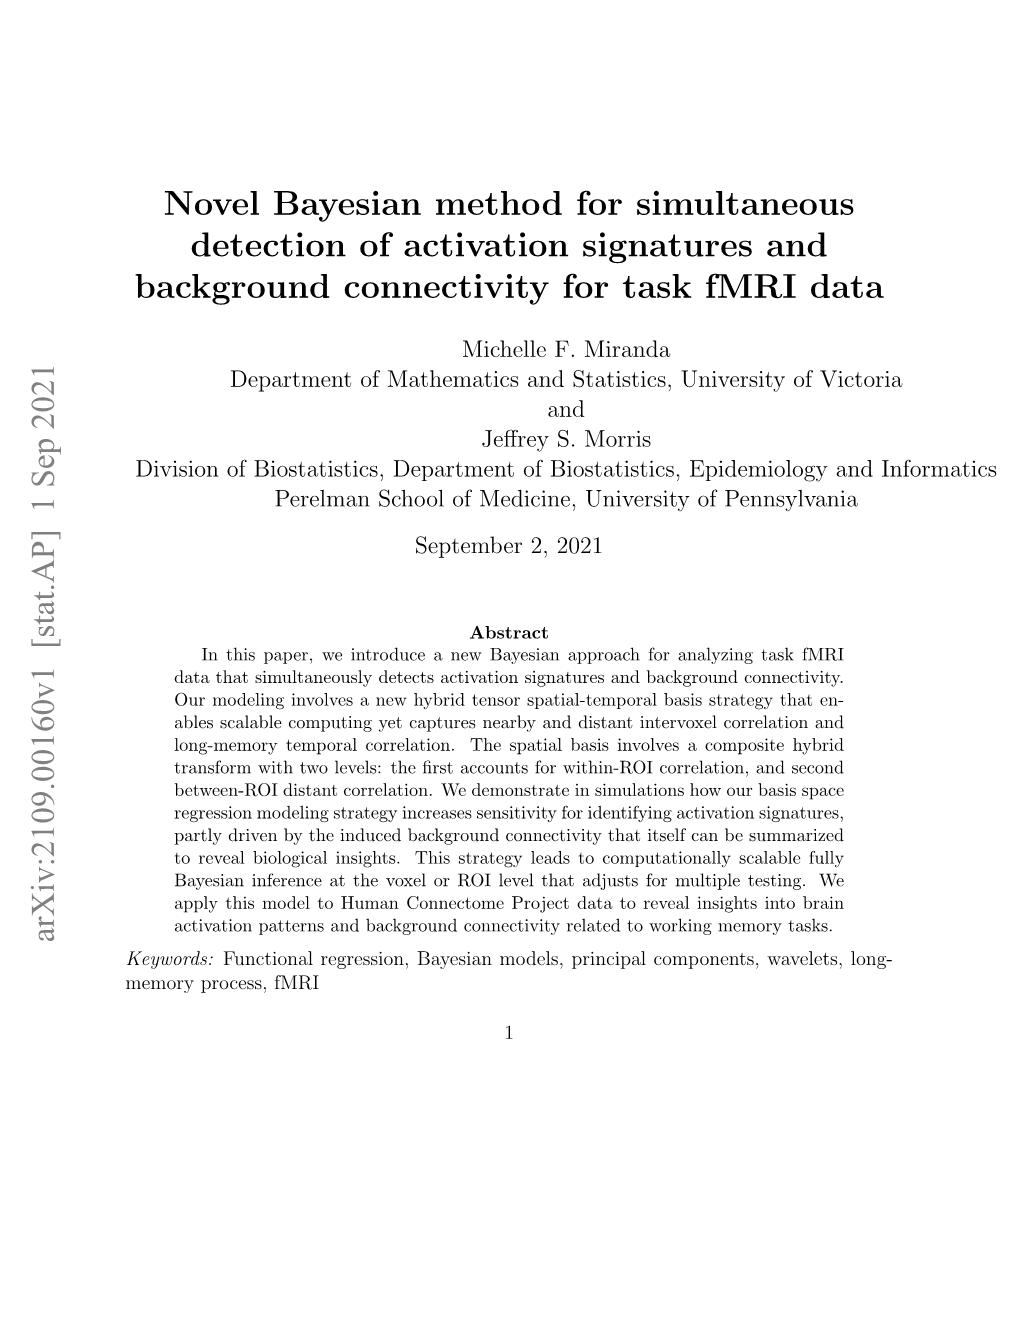 Novel Bayesian Method for Simultaneous Detection of Activation Signatures and Background Connectivity for Task Fmri Data